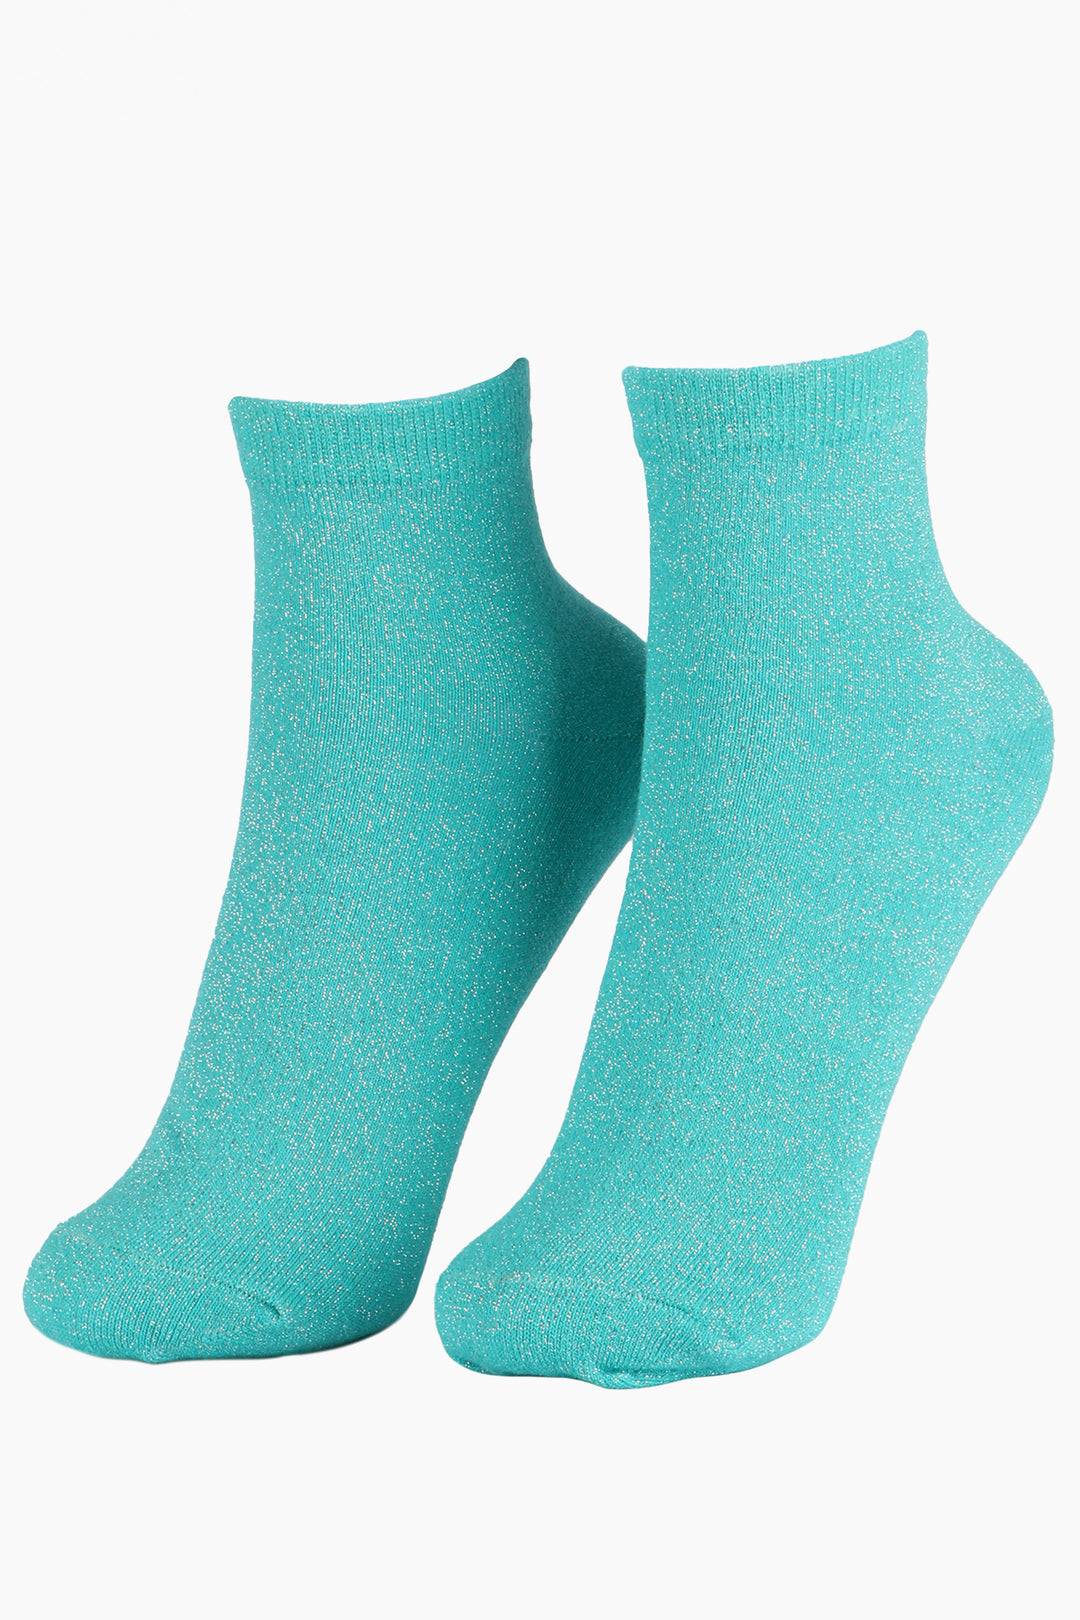 turquoise cotton socks with an all over silver glitter sparkle